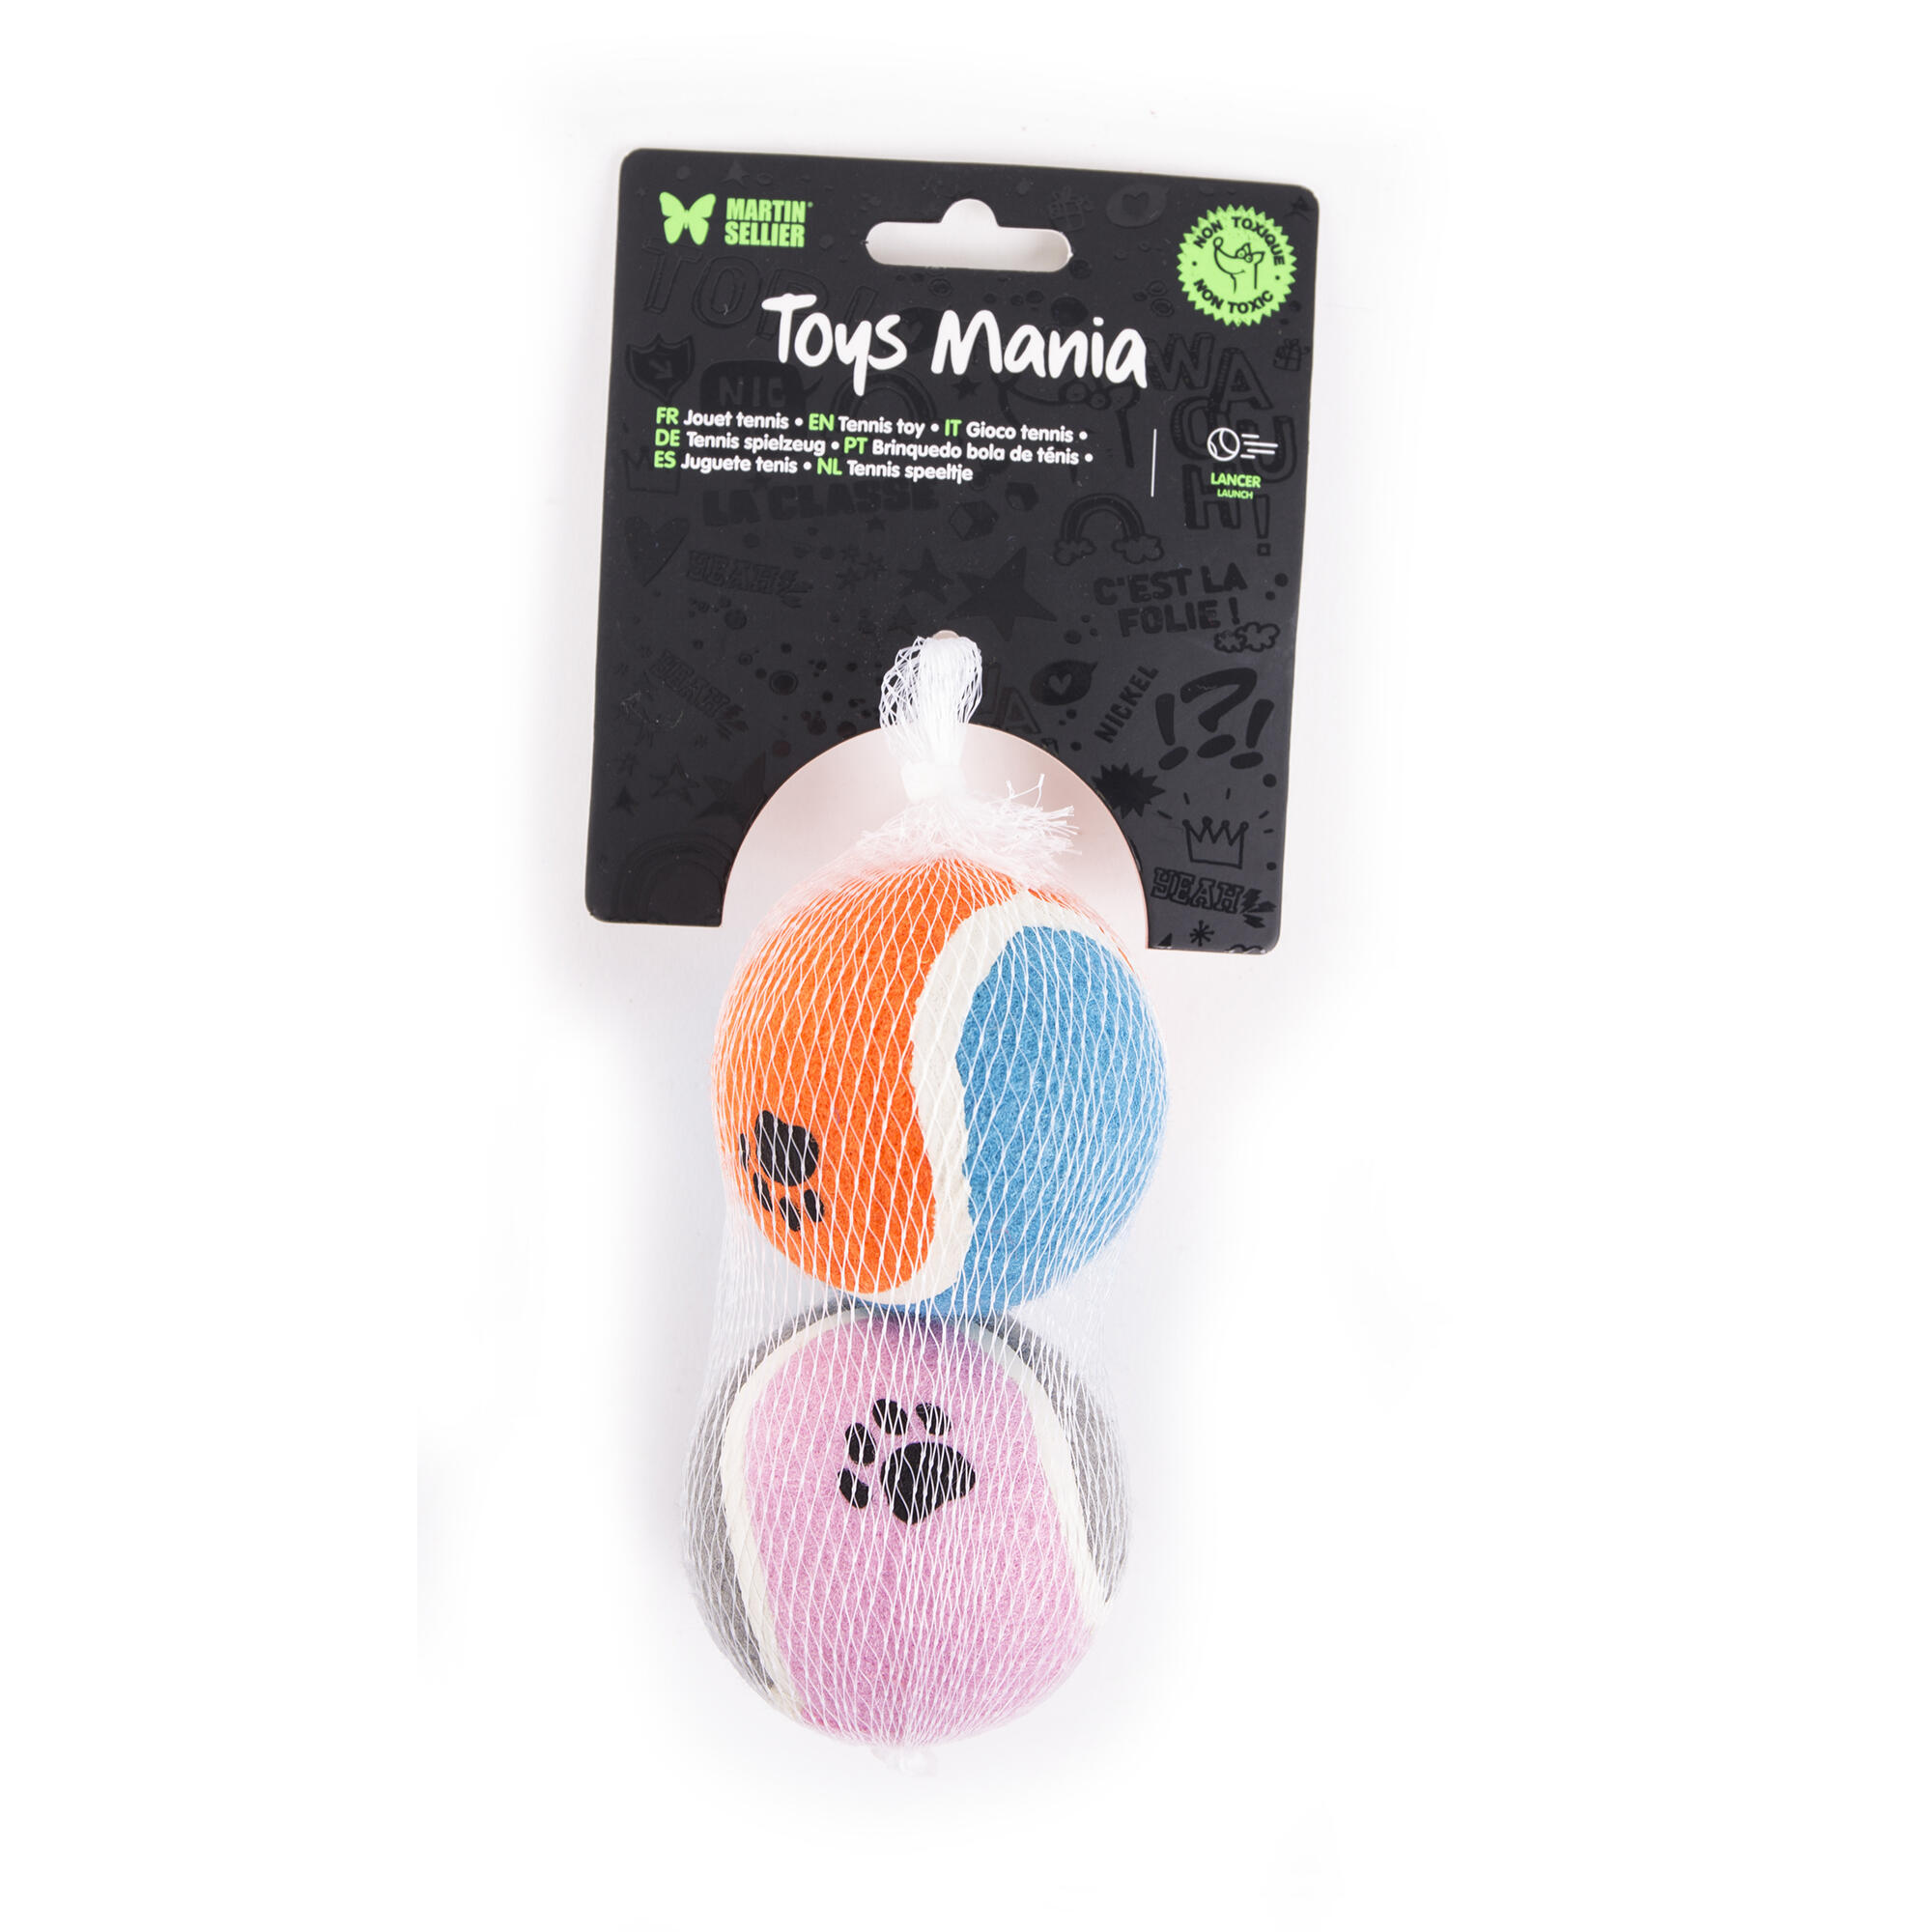 MARTIN SELLIER Set of 2 tennis balls for dogs.